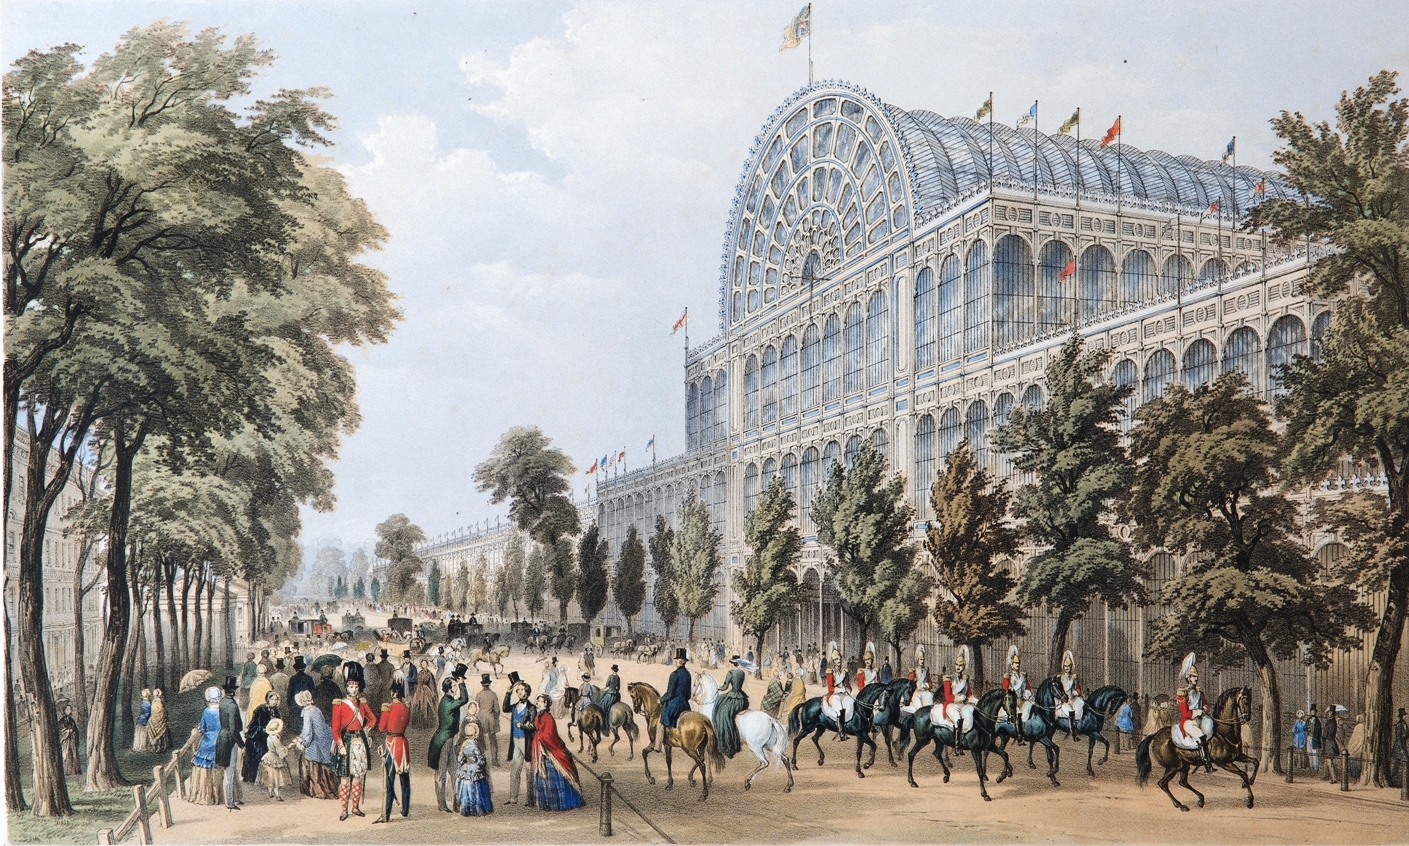 The Crystal Palace is believed to have been the largest building on Earth when it opened in 1851.